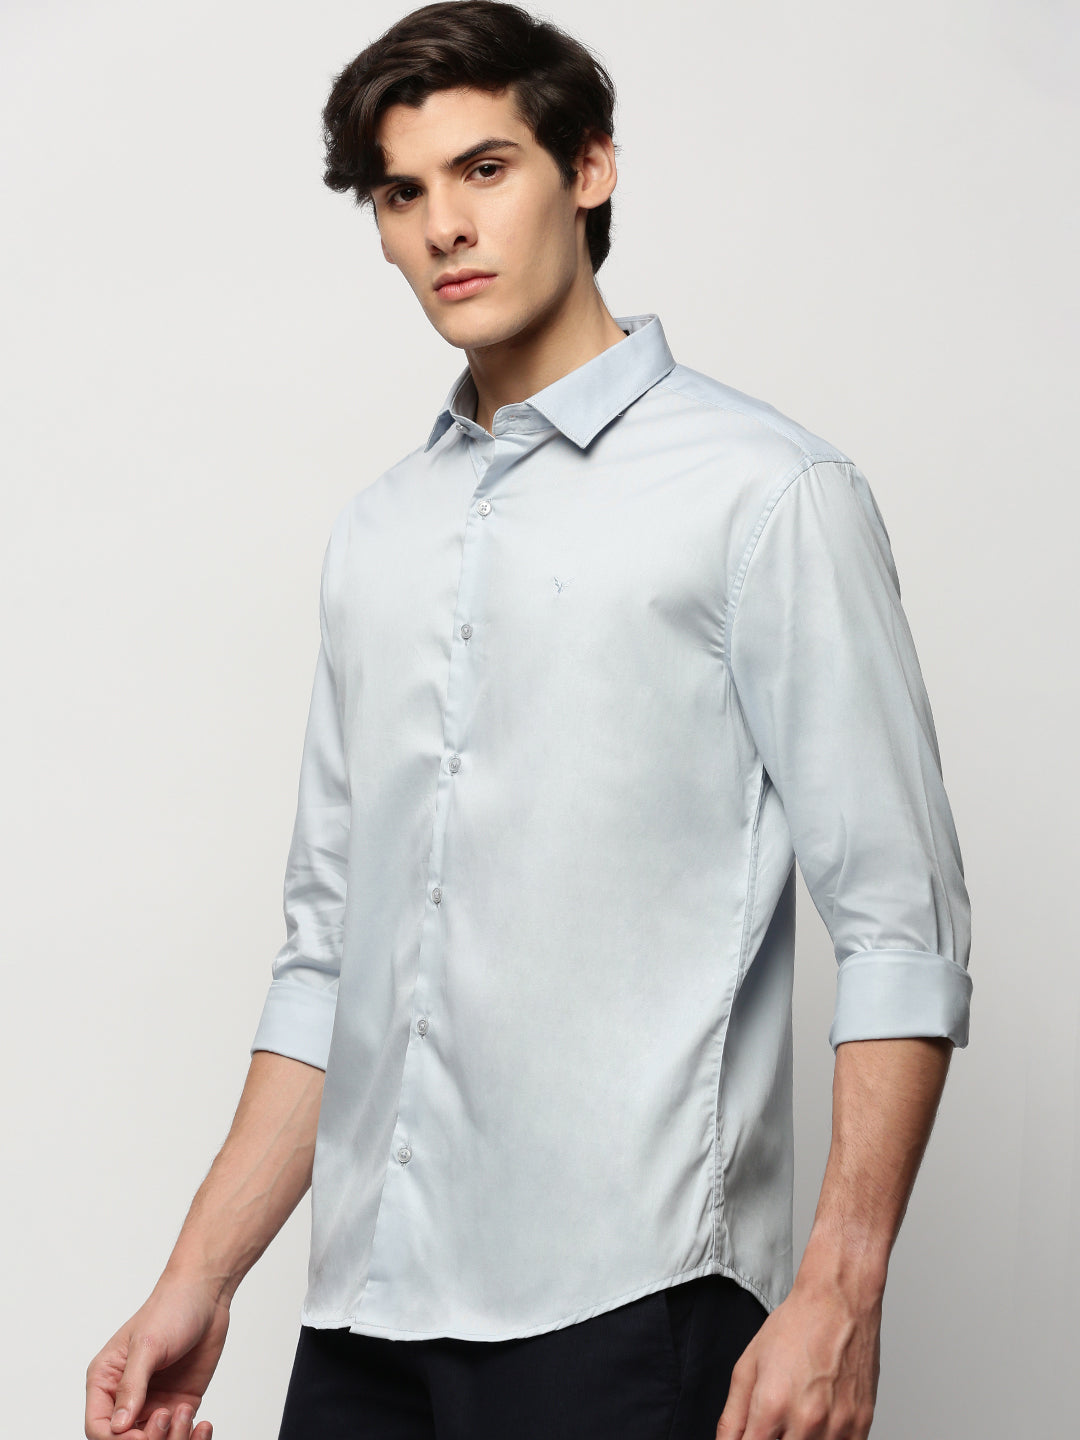 Men Blue Solid Casual Casual Shirts